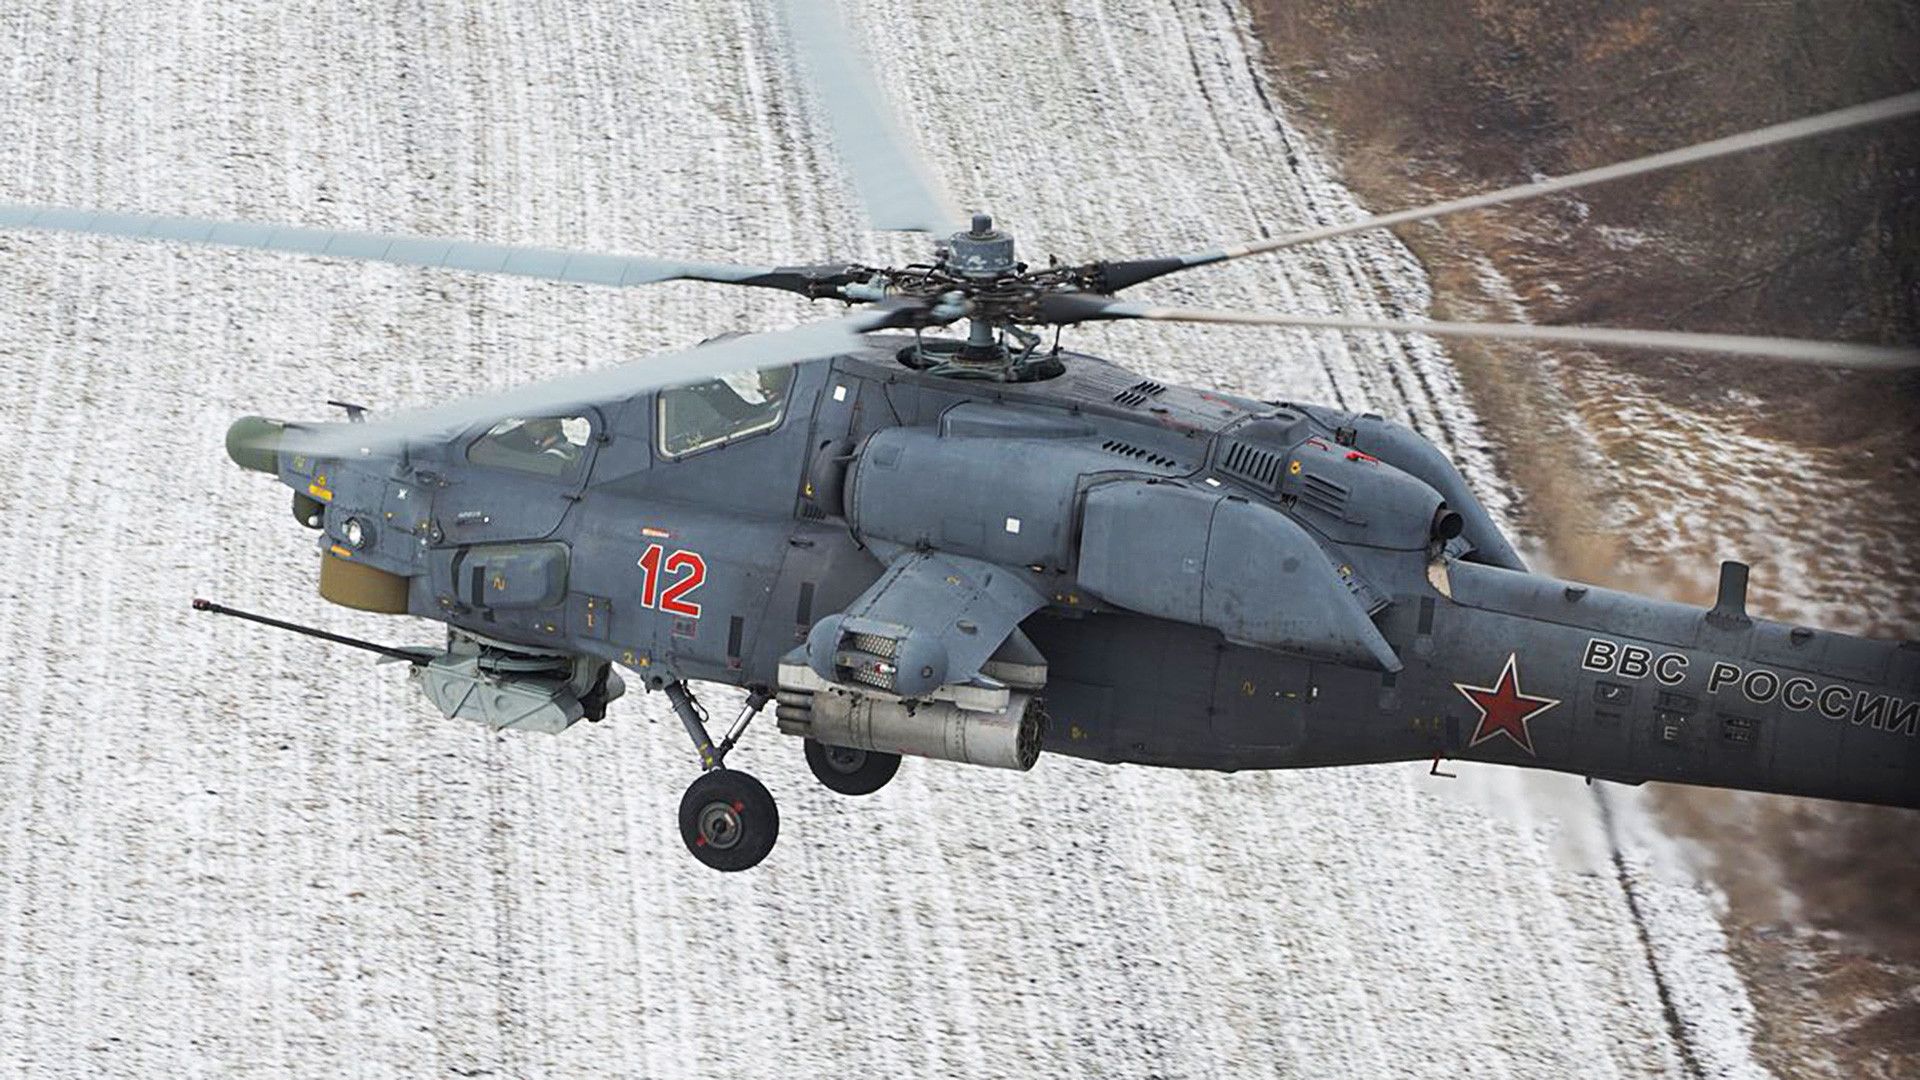 Black Sharks' and other Russian helicopters in battle (PHOTOS)